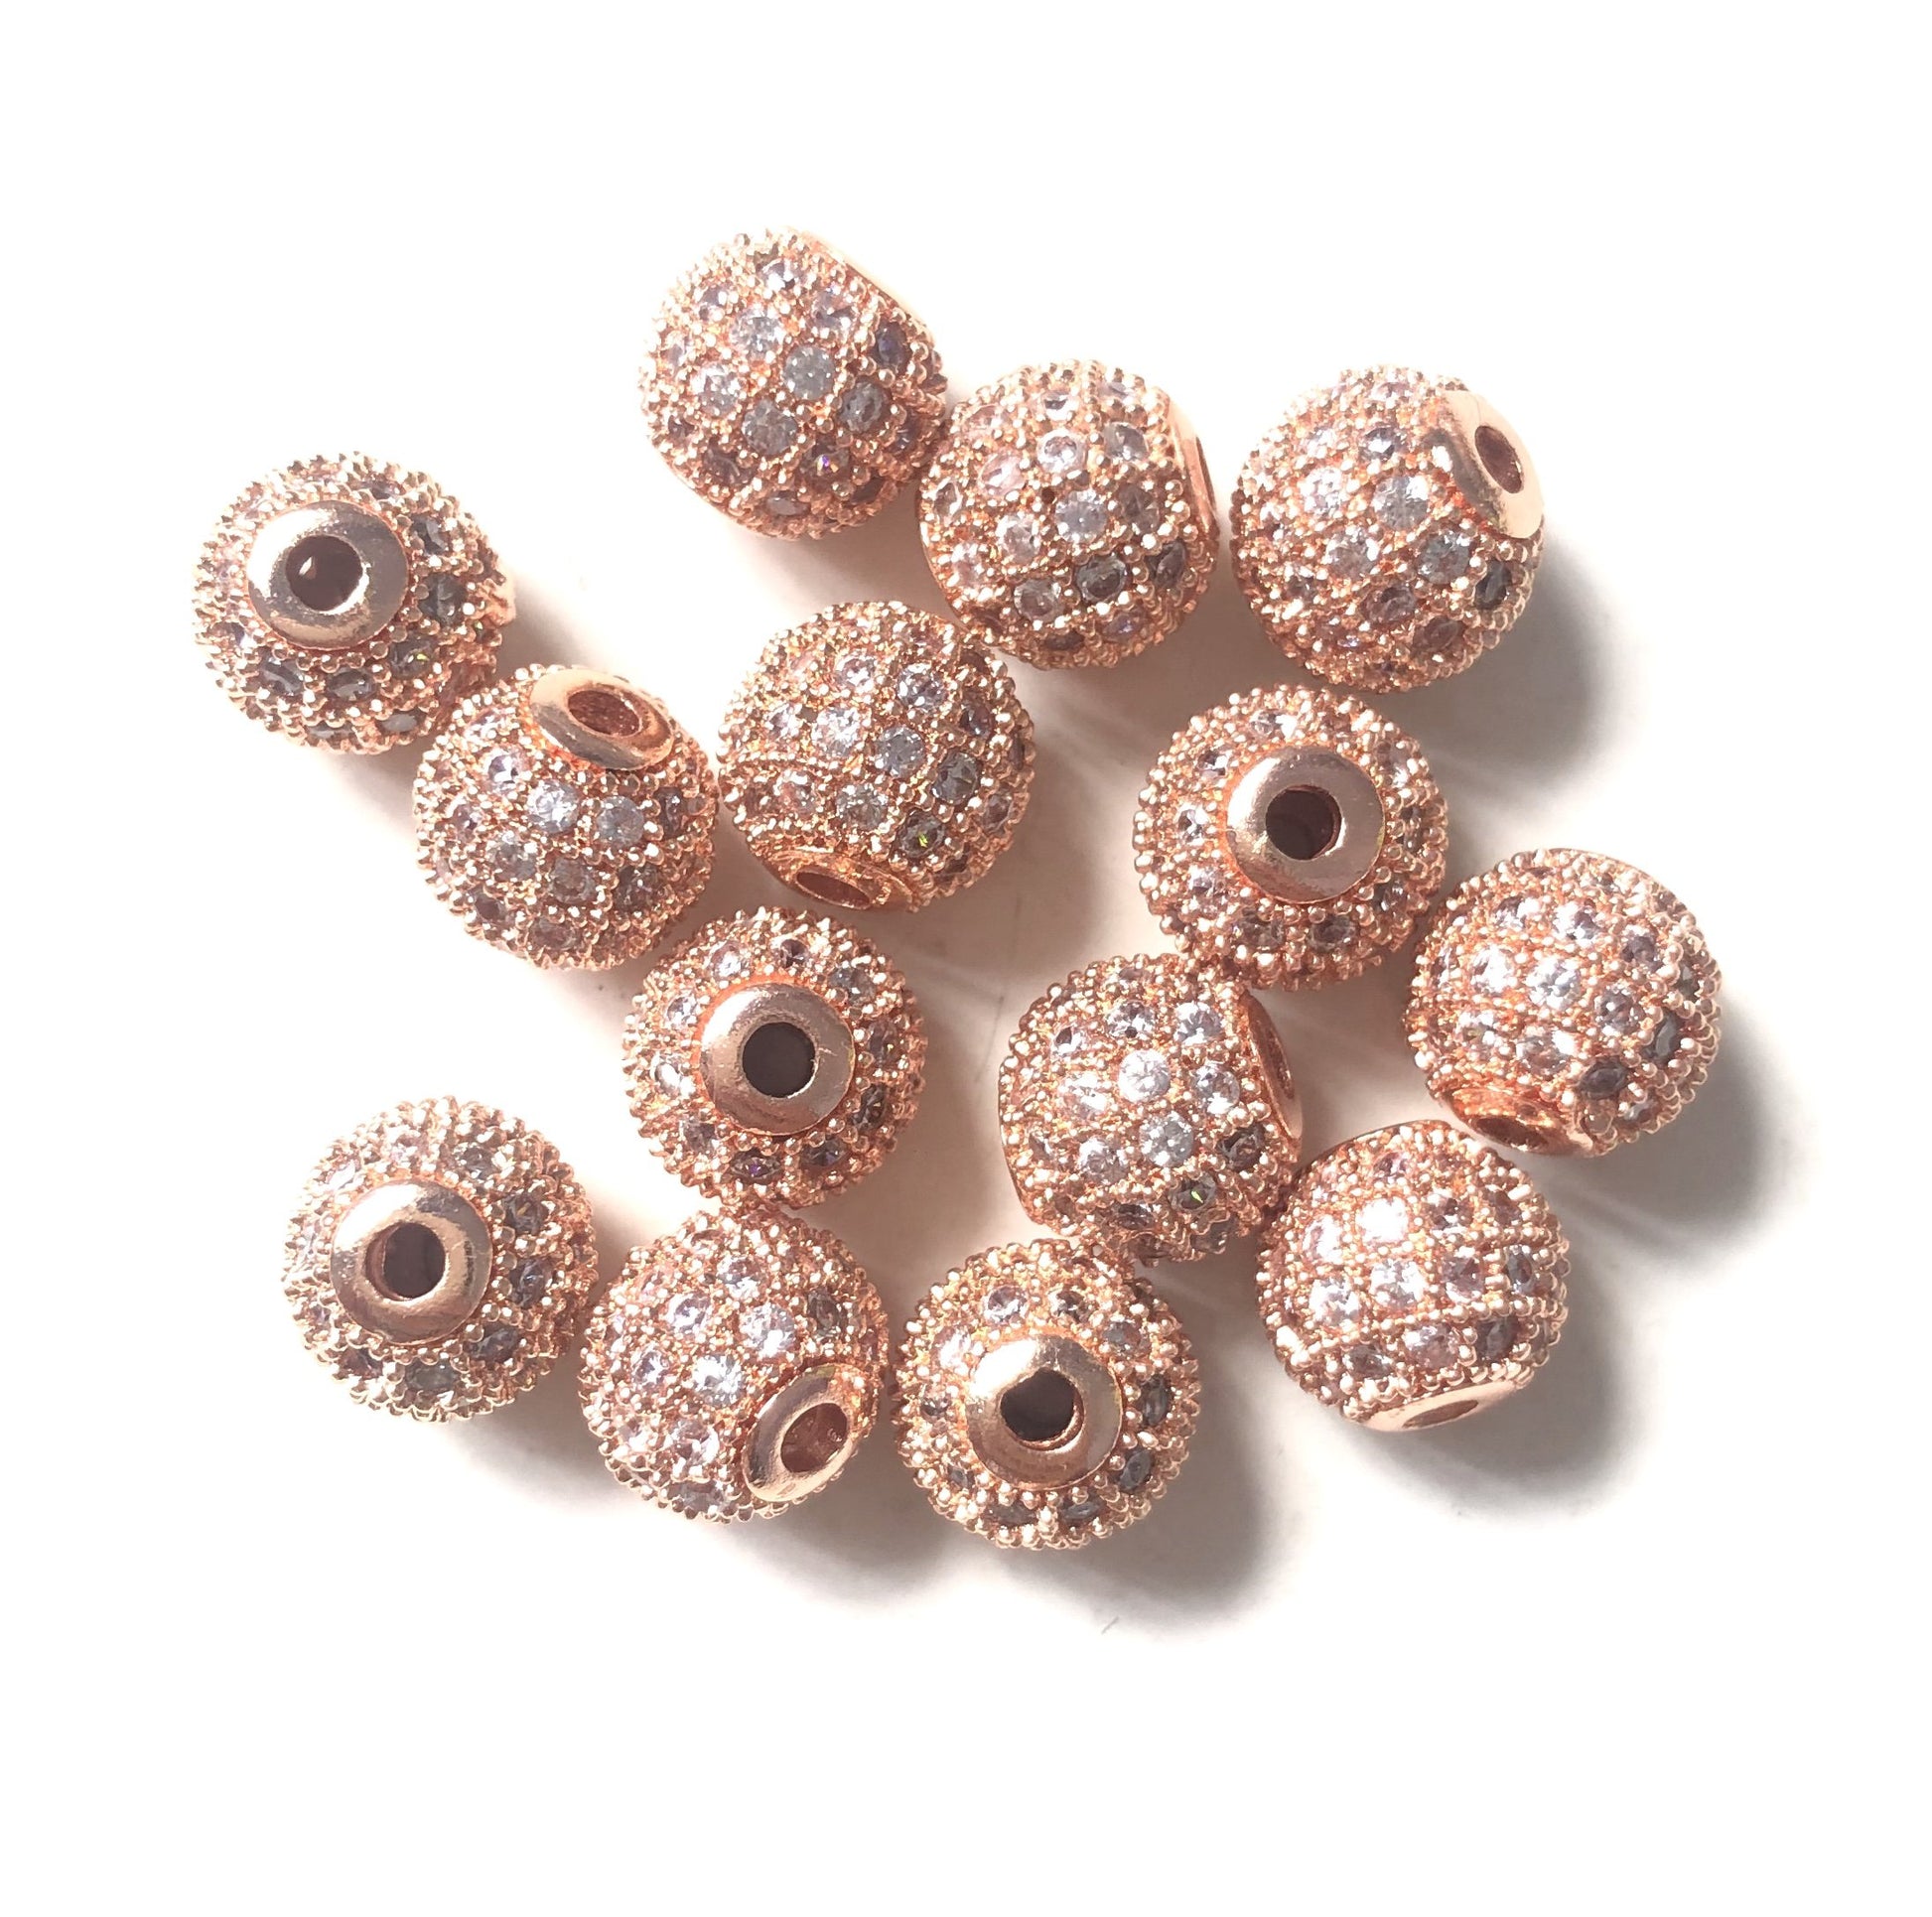 20pcs/lot 8mm CZ Paved Ball Spacers Rose Gold CZ Paved Spacers 8mm Beads Ball Beads Charms Beads Beyond